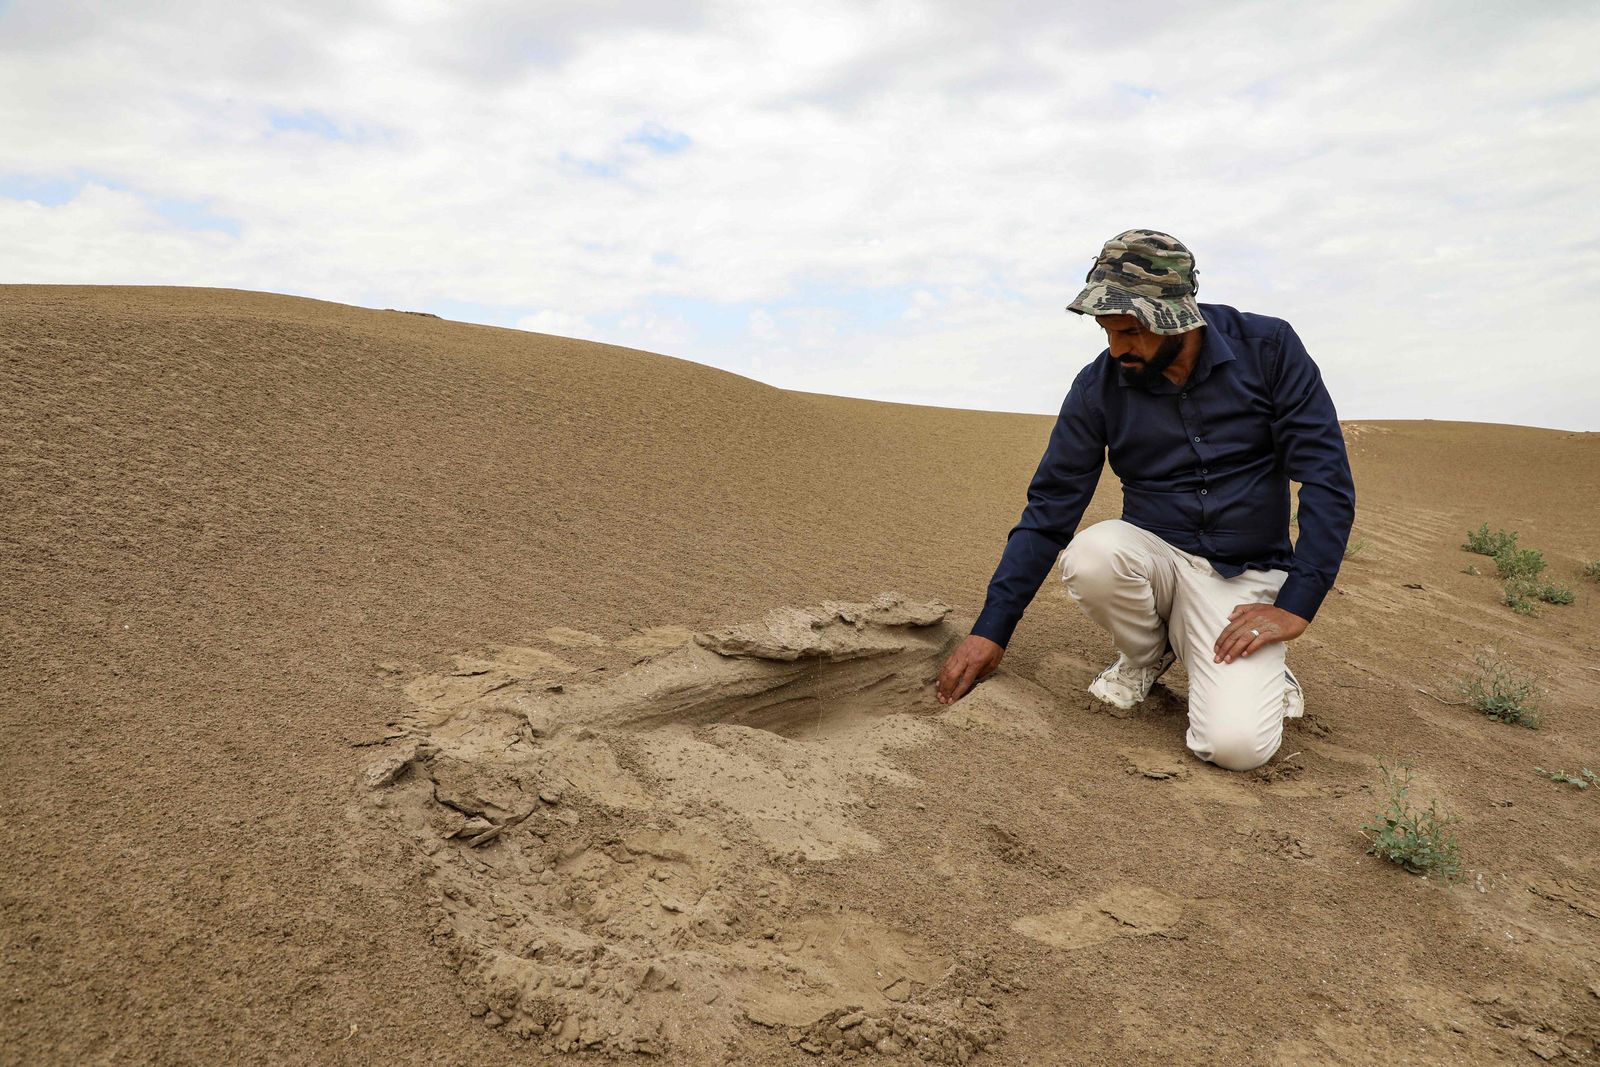 In this picture taken on March 31, 2023, archaeologist Aqeel Mansarawi searches for the remains of an ancient structure at the Umm al-Aqarib archaeological site, frequently buried by sandstorms due to desertification, in the district of al-Rifai in Iraq's southern Dhi Qar province. - Iraqi archeological marvels that survived millennia and the ravages of war now face a modern threat: being blasted and buried by sandstorms linked to climate change. Many Babylonian treasures, painstakingly unearthed, are slowly disappearing again under wind-blown sand in a land parched by rising heat and prolonged droughts. (Photo by Asaad NIAZI / AFP) - AFP